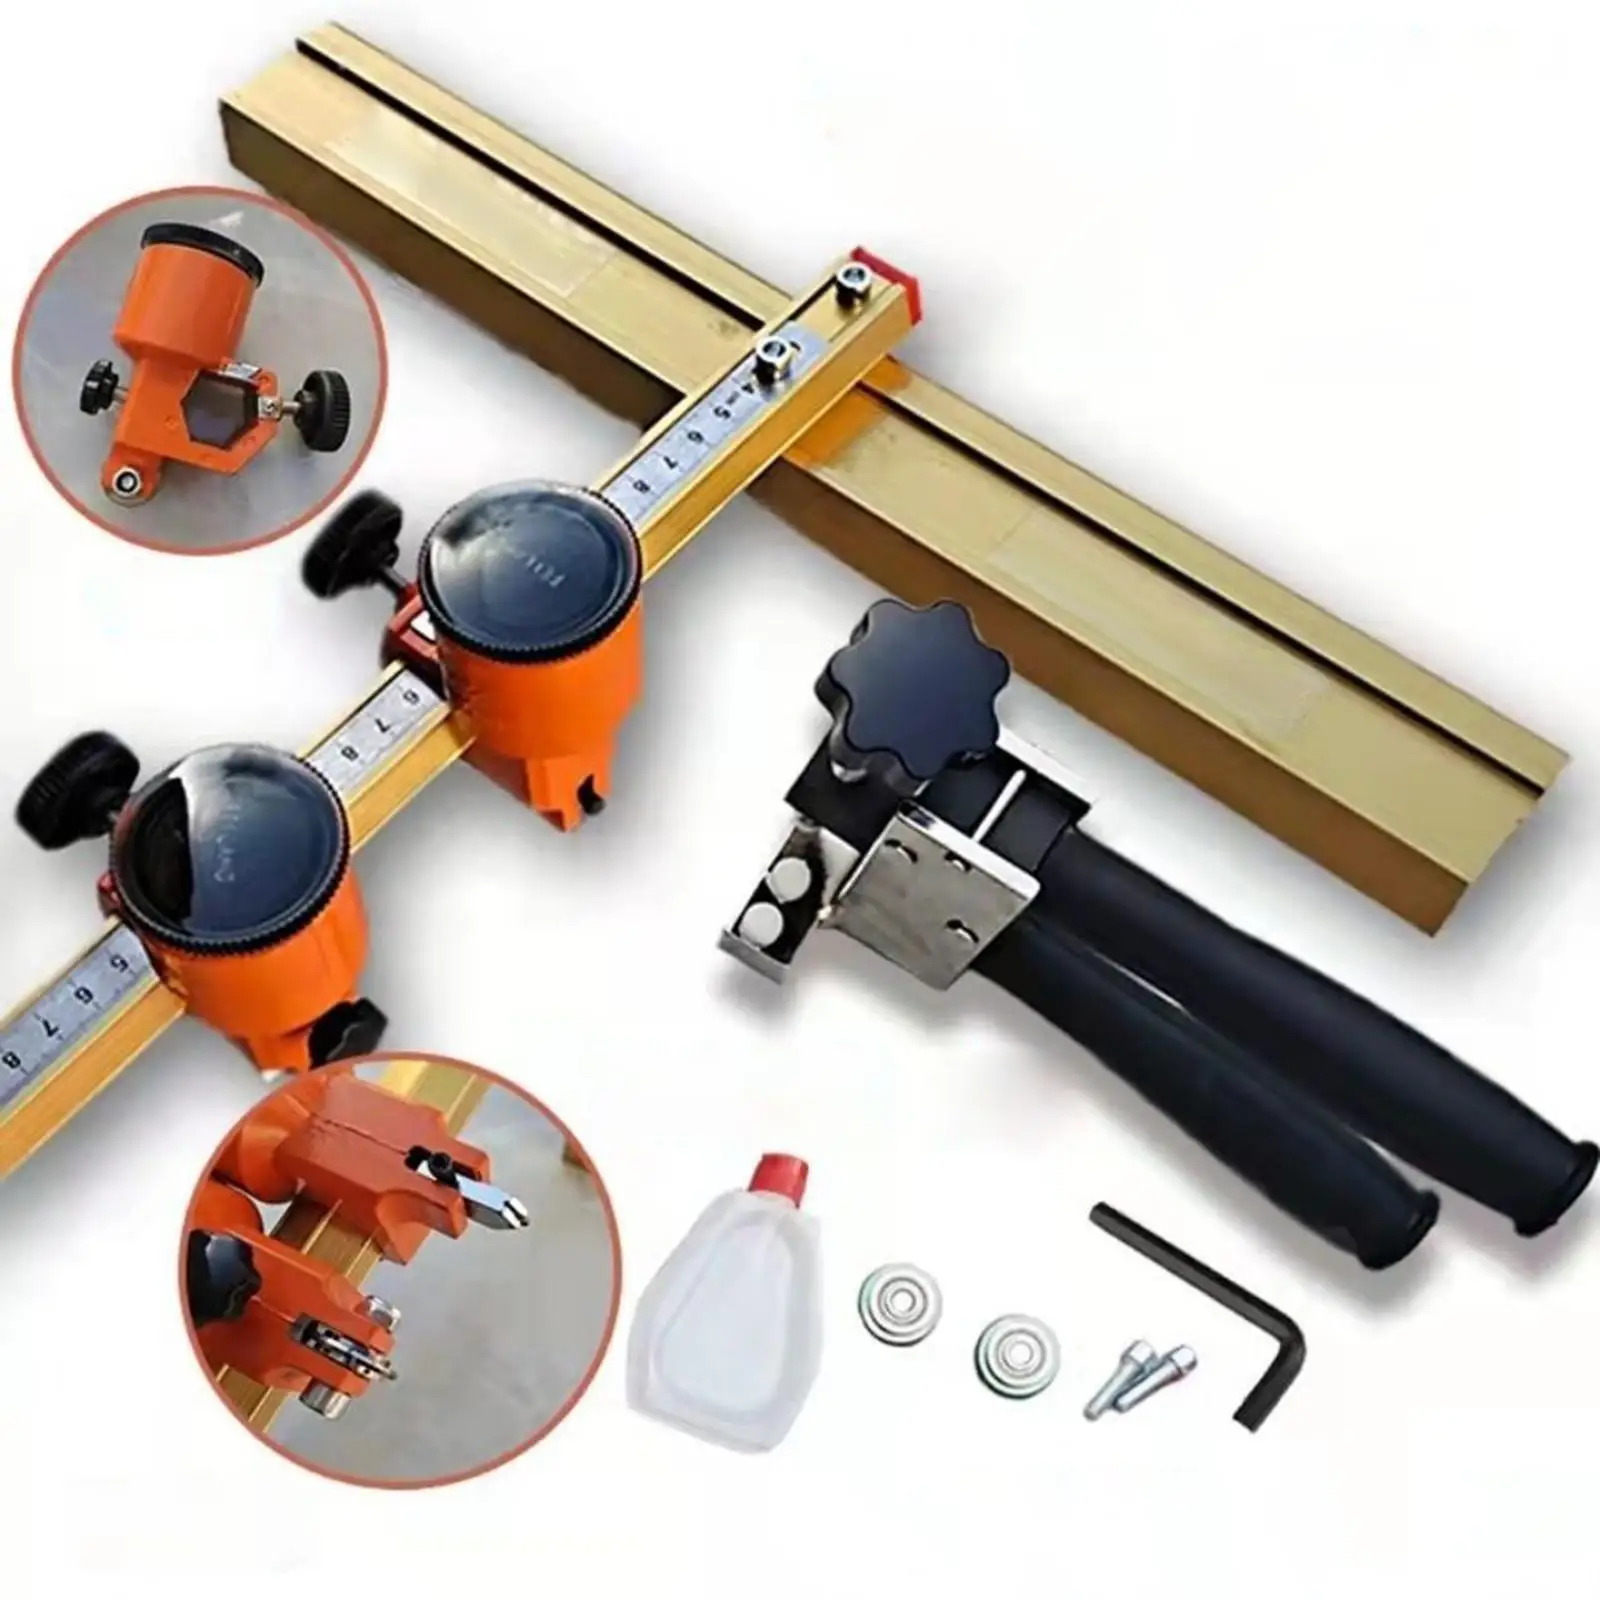 Glass Cutter Self Controlled Oiling Glass Cutting Tool Aluminum Alloy Glass Tile Cutter Portable DIY Hand Tool for Mirrors Tiles